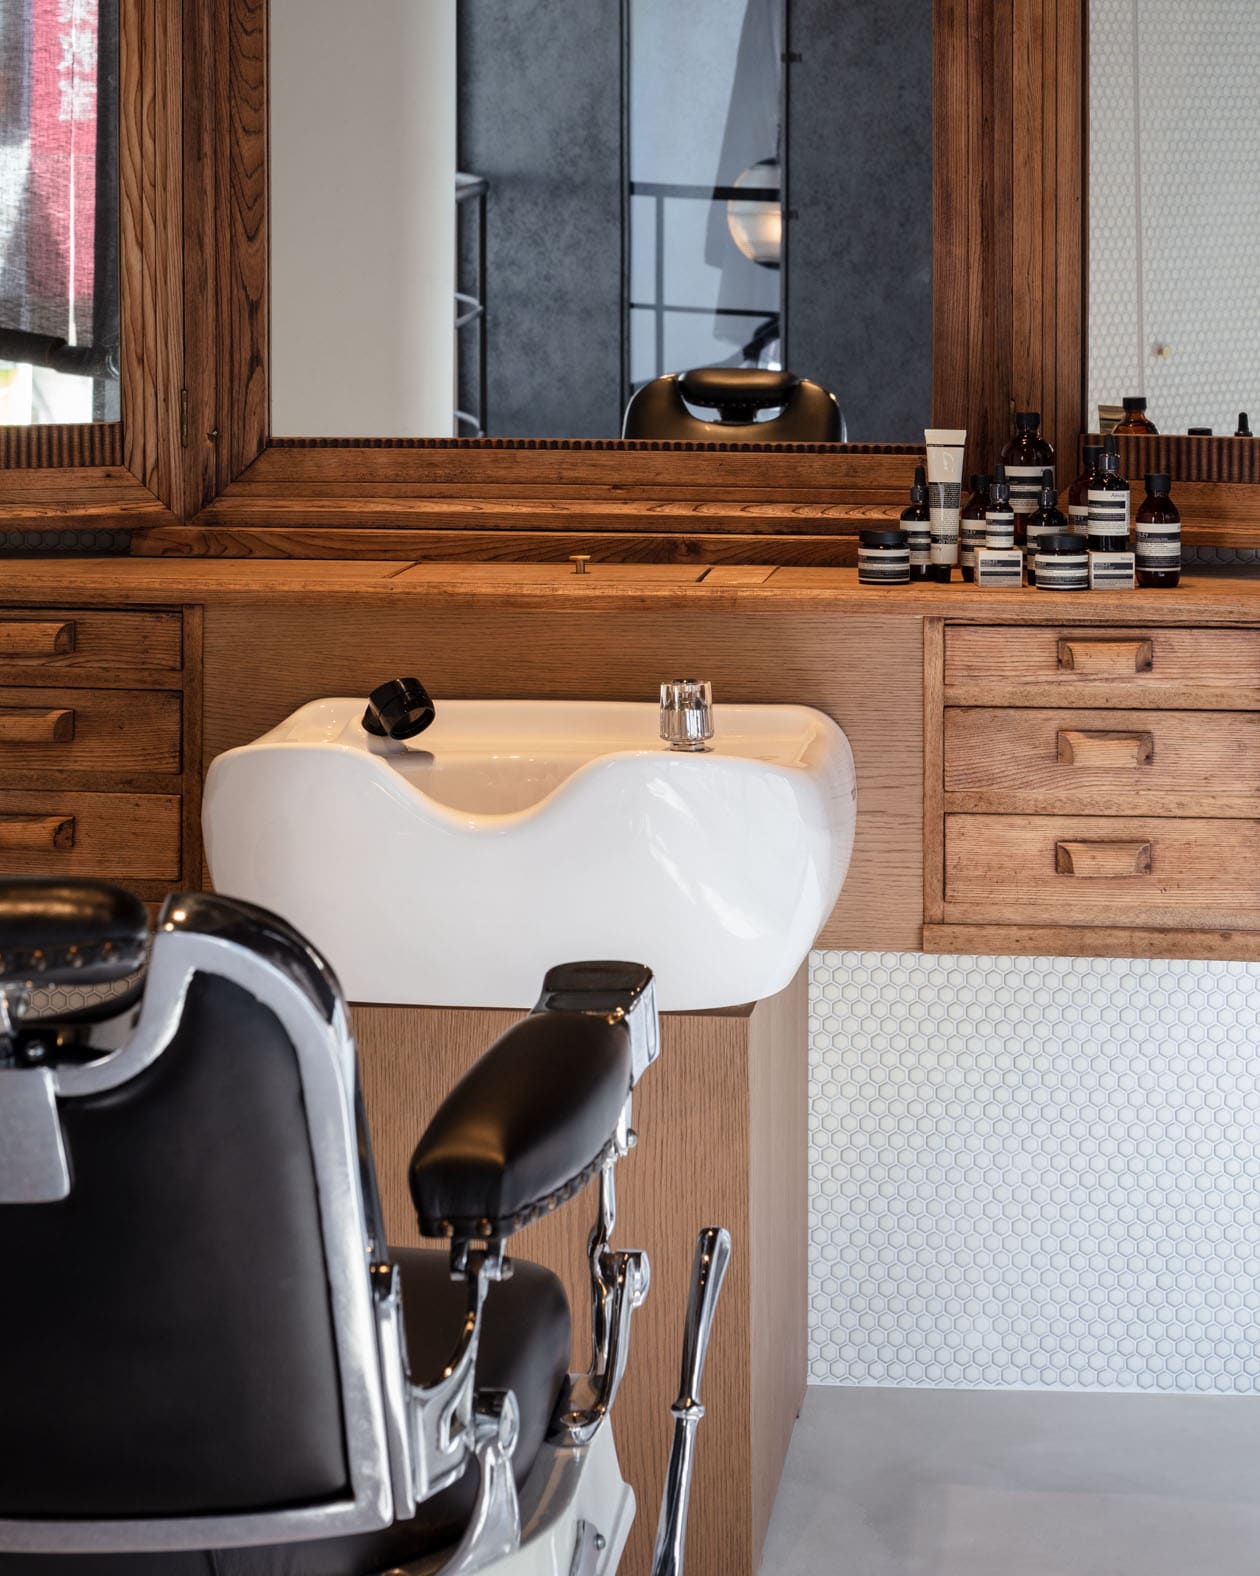 An interior design of a hair salon with a shampoo bowl and a vintage barber’s chair